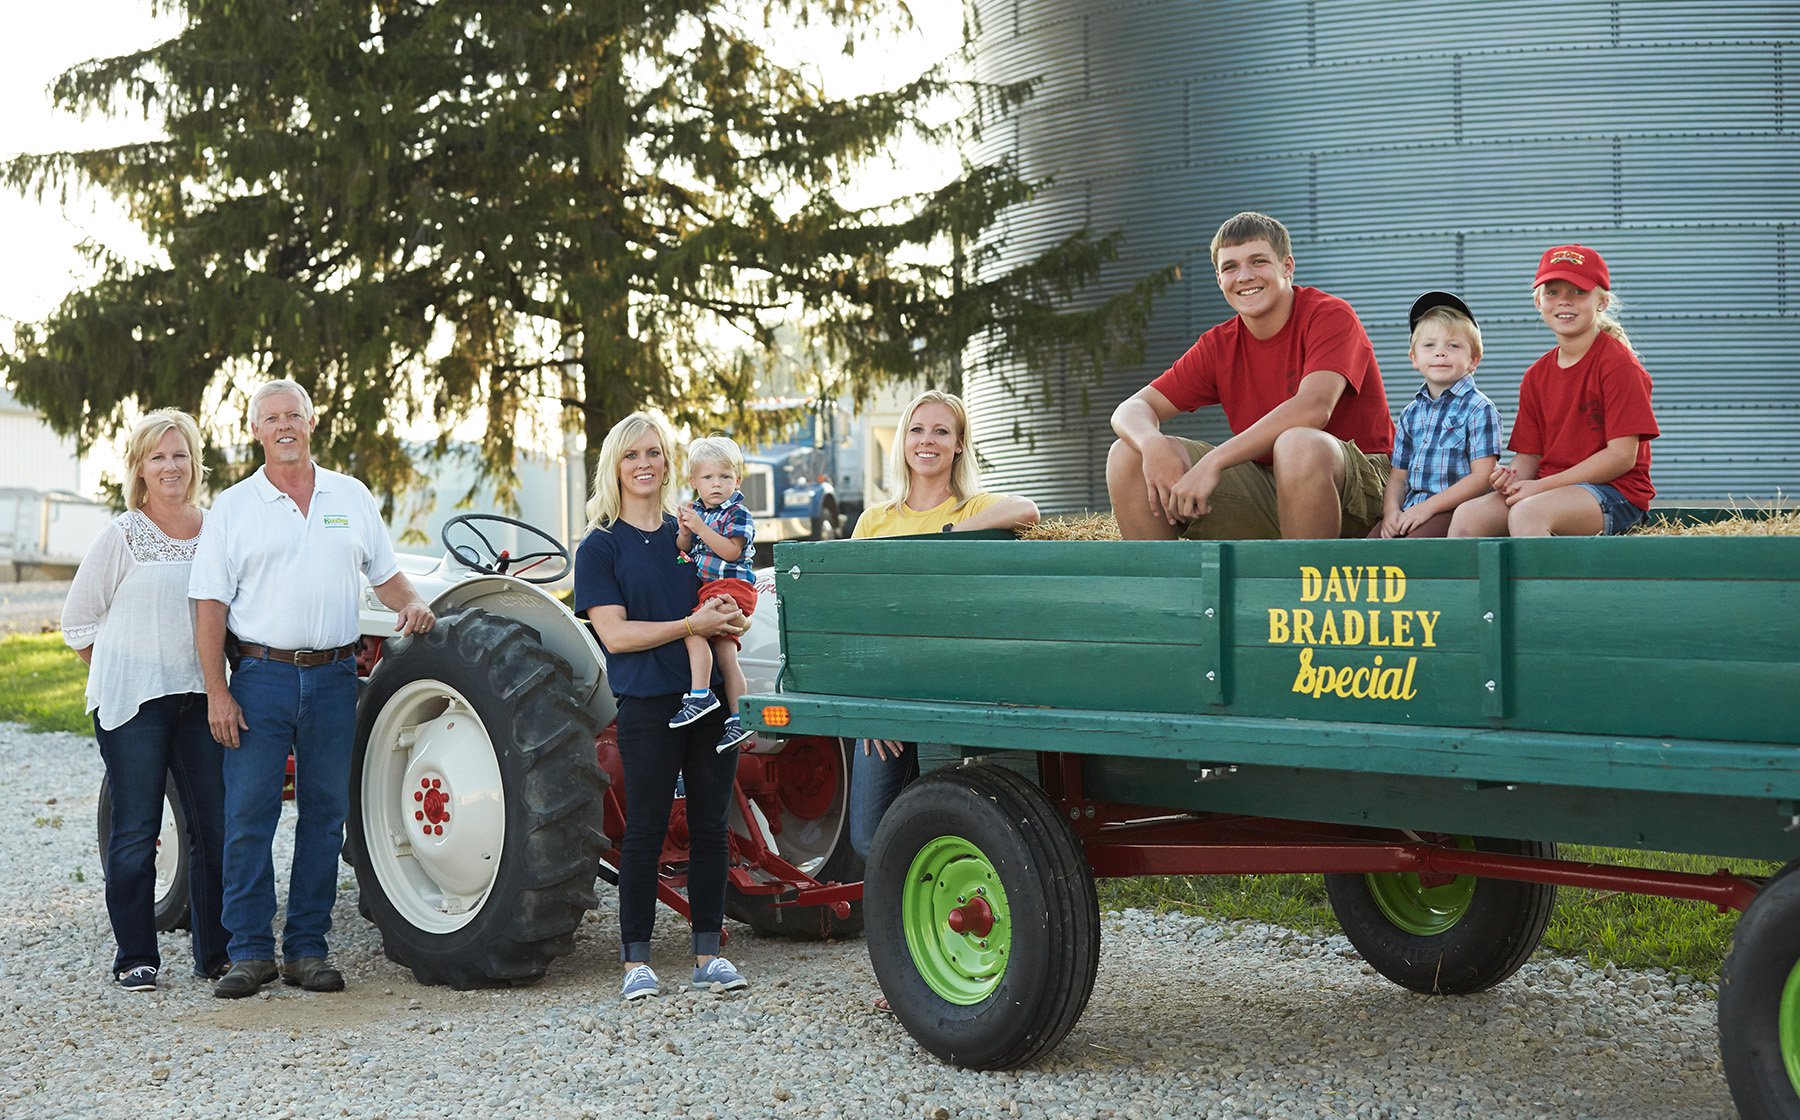 Image of Keesling Farms Growers for Red Gold Tomatoes Keesling family on the farm with tractor and green wagon